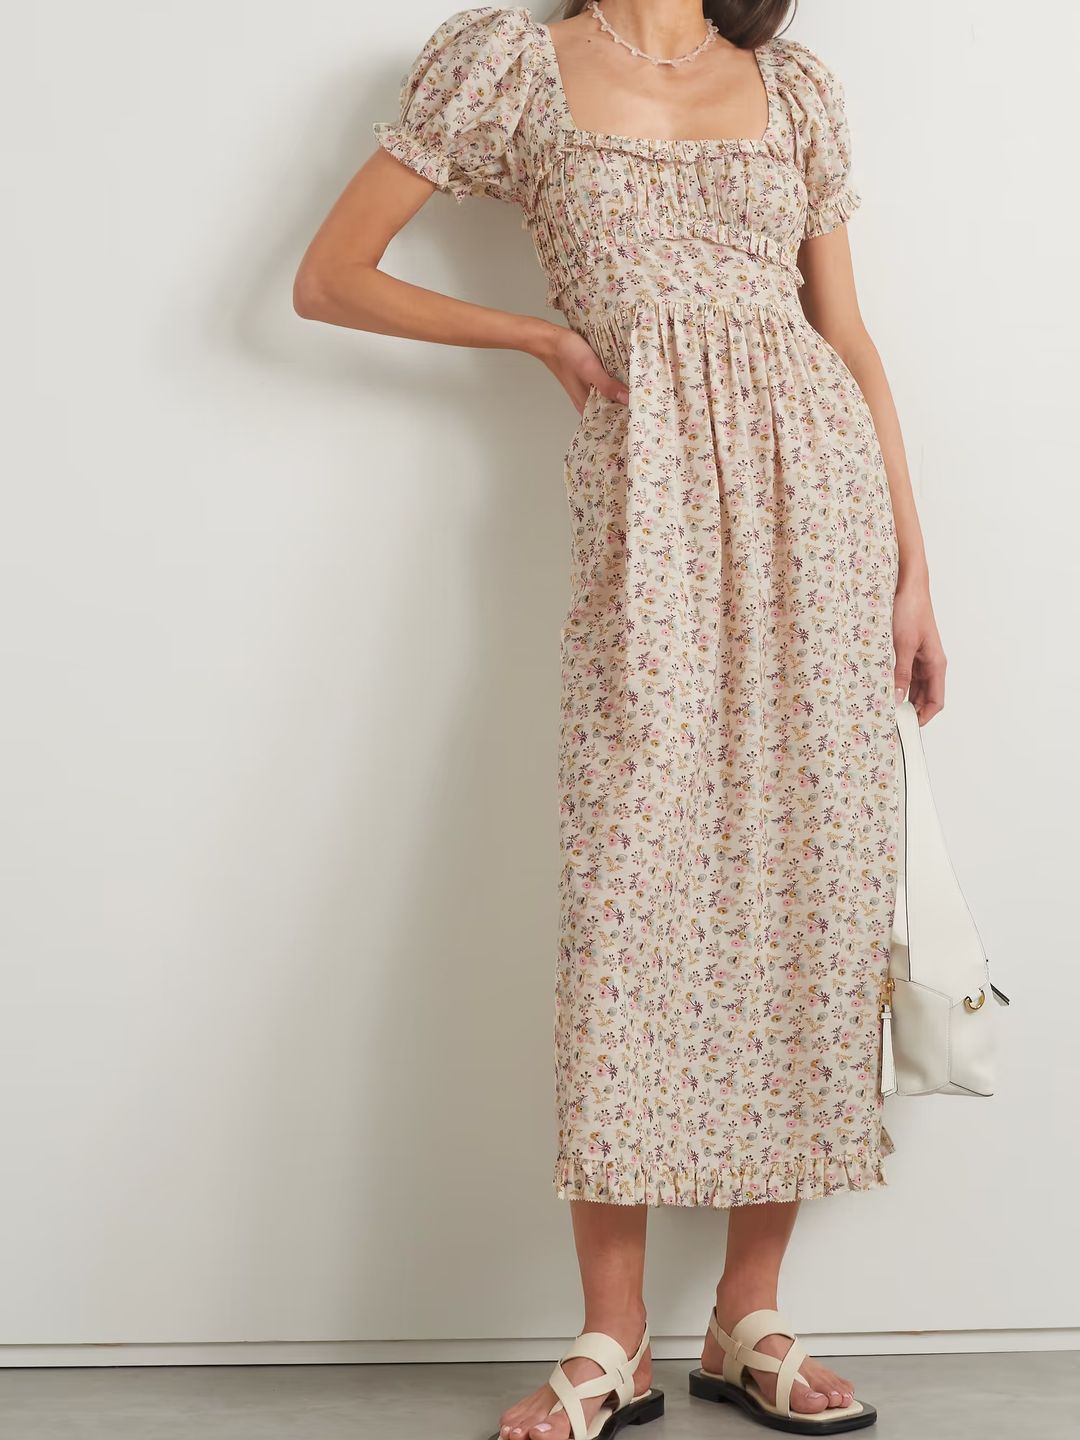 Buy Less, Wear More: Angie Smith’s edit of 10 stunning summer dresses ...